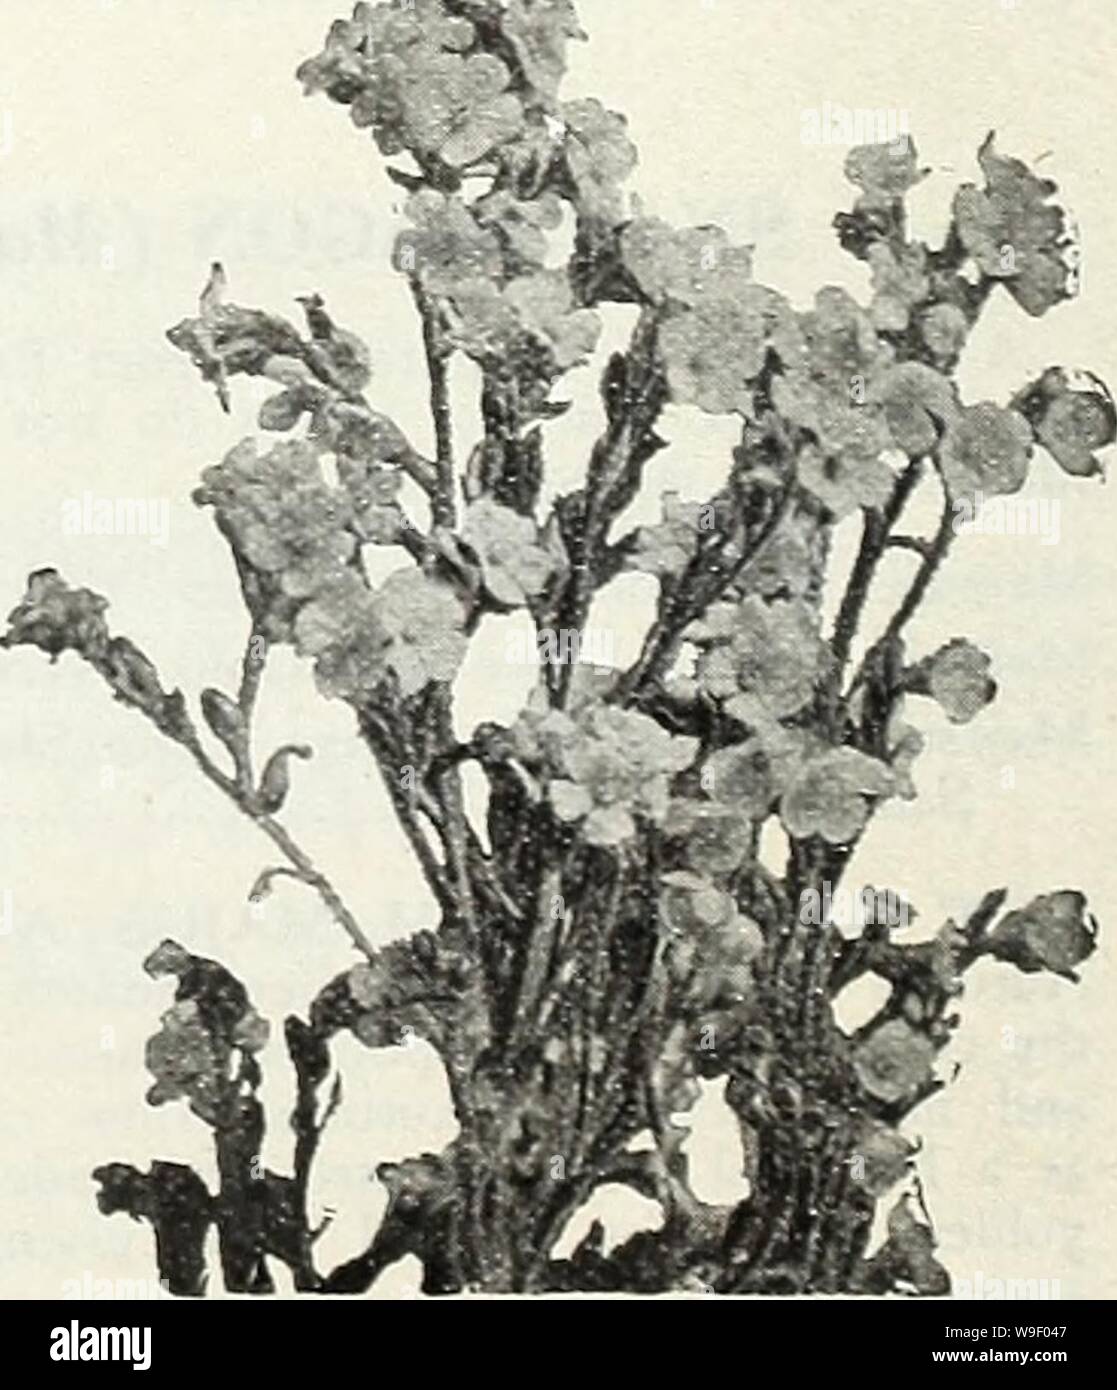 Archive image from page 5 of Currie Bros  fifty-eighth year. Currie Bros. : fifty-eighth year 1933  curriebrosfiftye19curr Year: 1933 ( ANTIRRHINUM NANUM GRANDIFLORUM TANGERINE The flowers are a brilliant fiery orange of great intensity holding its orange brilliancy till the flowers drop, throwing many long spikes with fine large flowers. Tangerine will make an excellent bedding variety having a color much in de- mand lending itself to color schemes for the garden beautiful. Pkt. 25c ANTIRRHINUM TOM THUMB DAINTY GEM' a Antirrhinum Tom Thumb 'Dainty Gem' ANCHUSA ANNUAL BLUE BIRD Plants grow abo Stock Photo